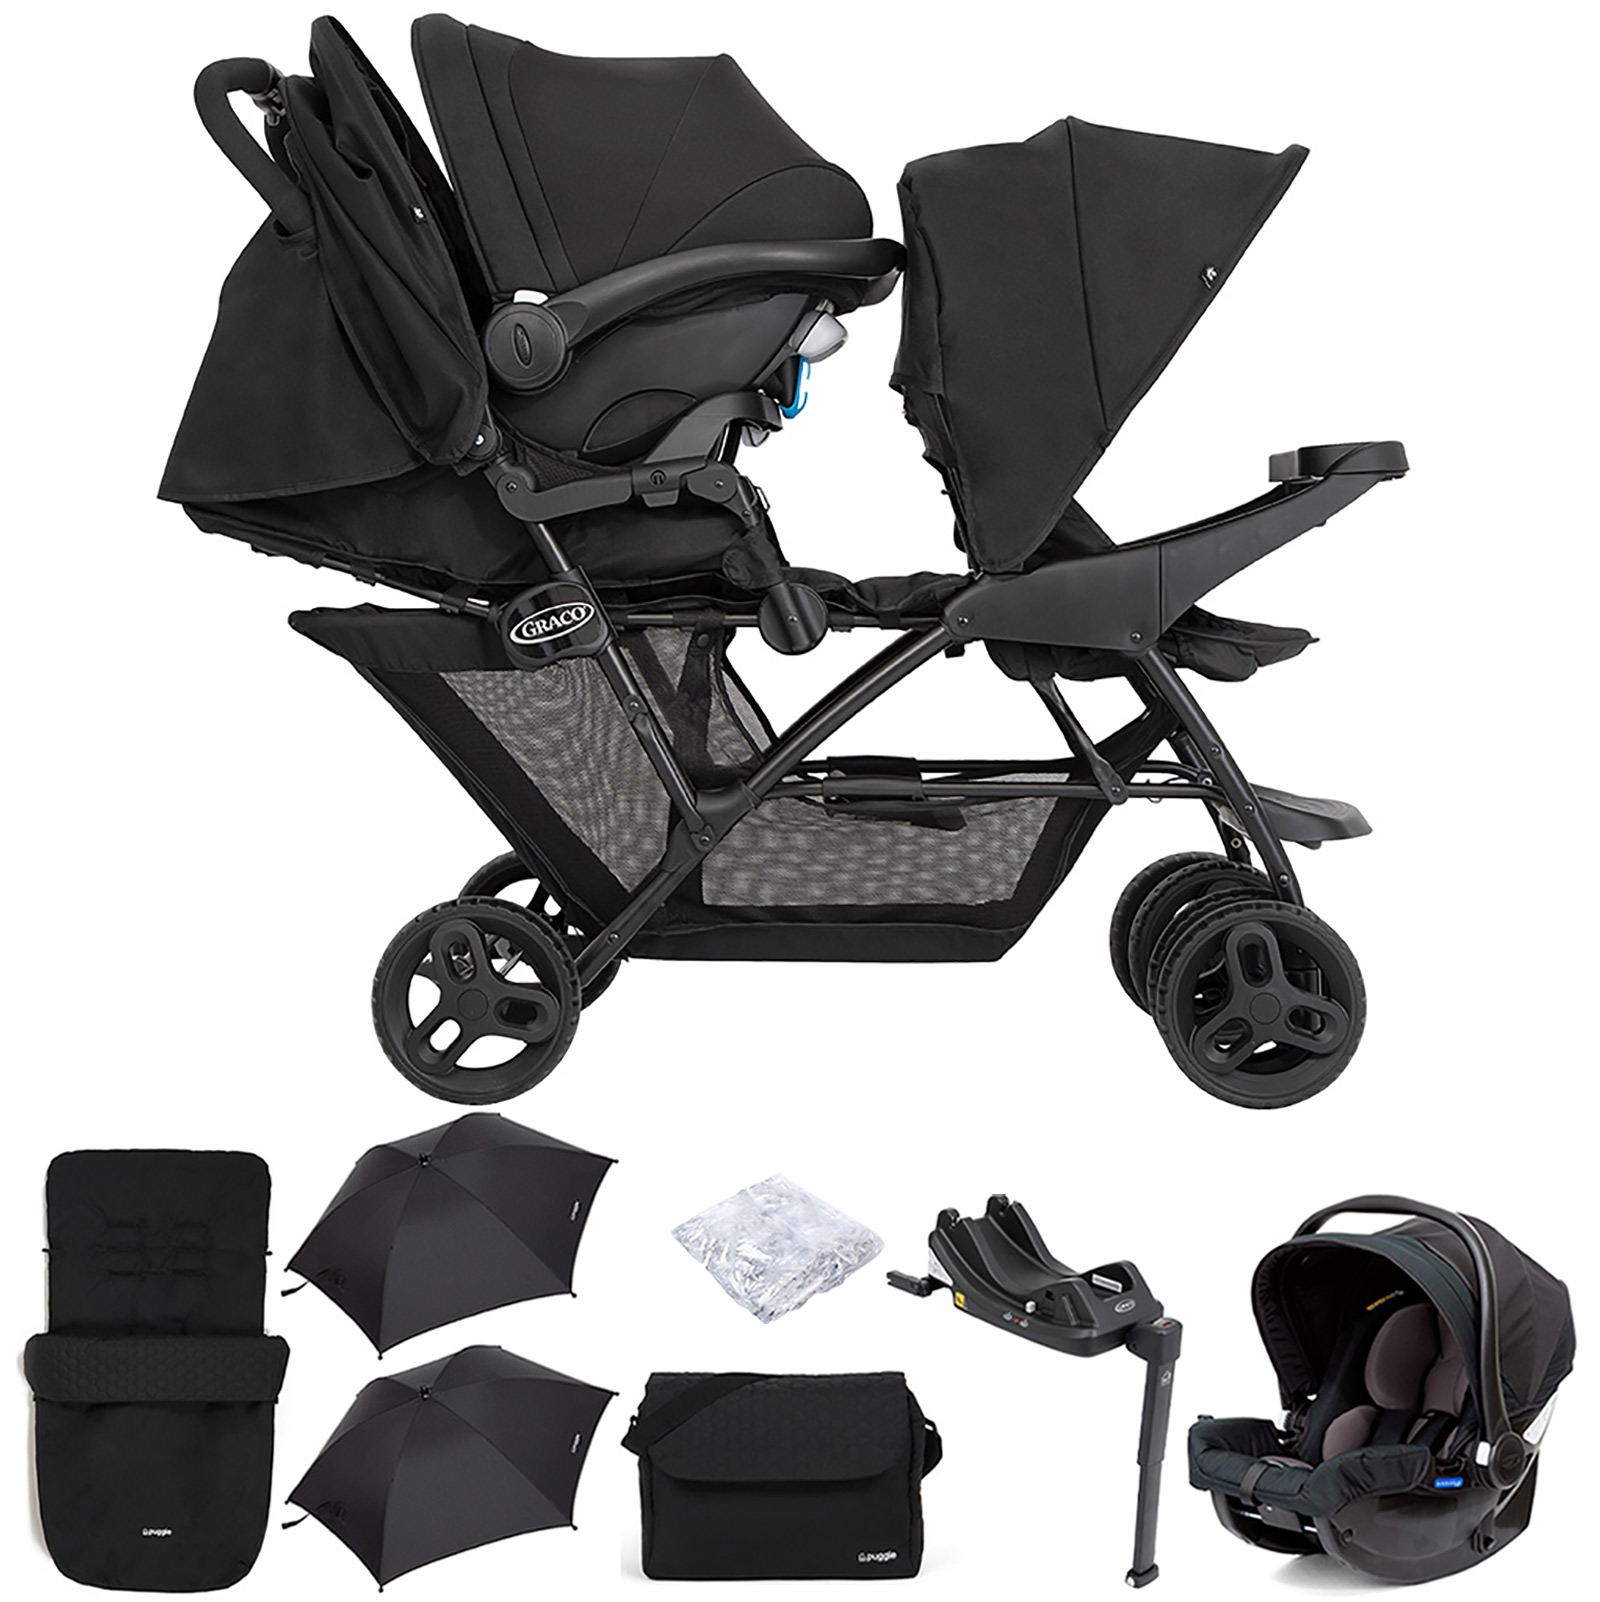 Graco Blaaze™ Stadium Duo Tandem Travel System with Front Apron, Raincover, Footmuff, Changing Bag, Car Seat, Base & 2 Parasols - Night Sky